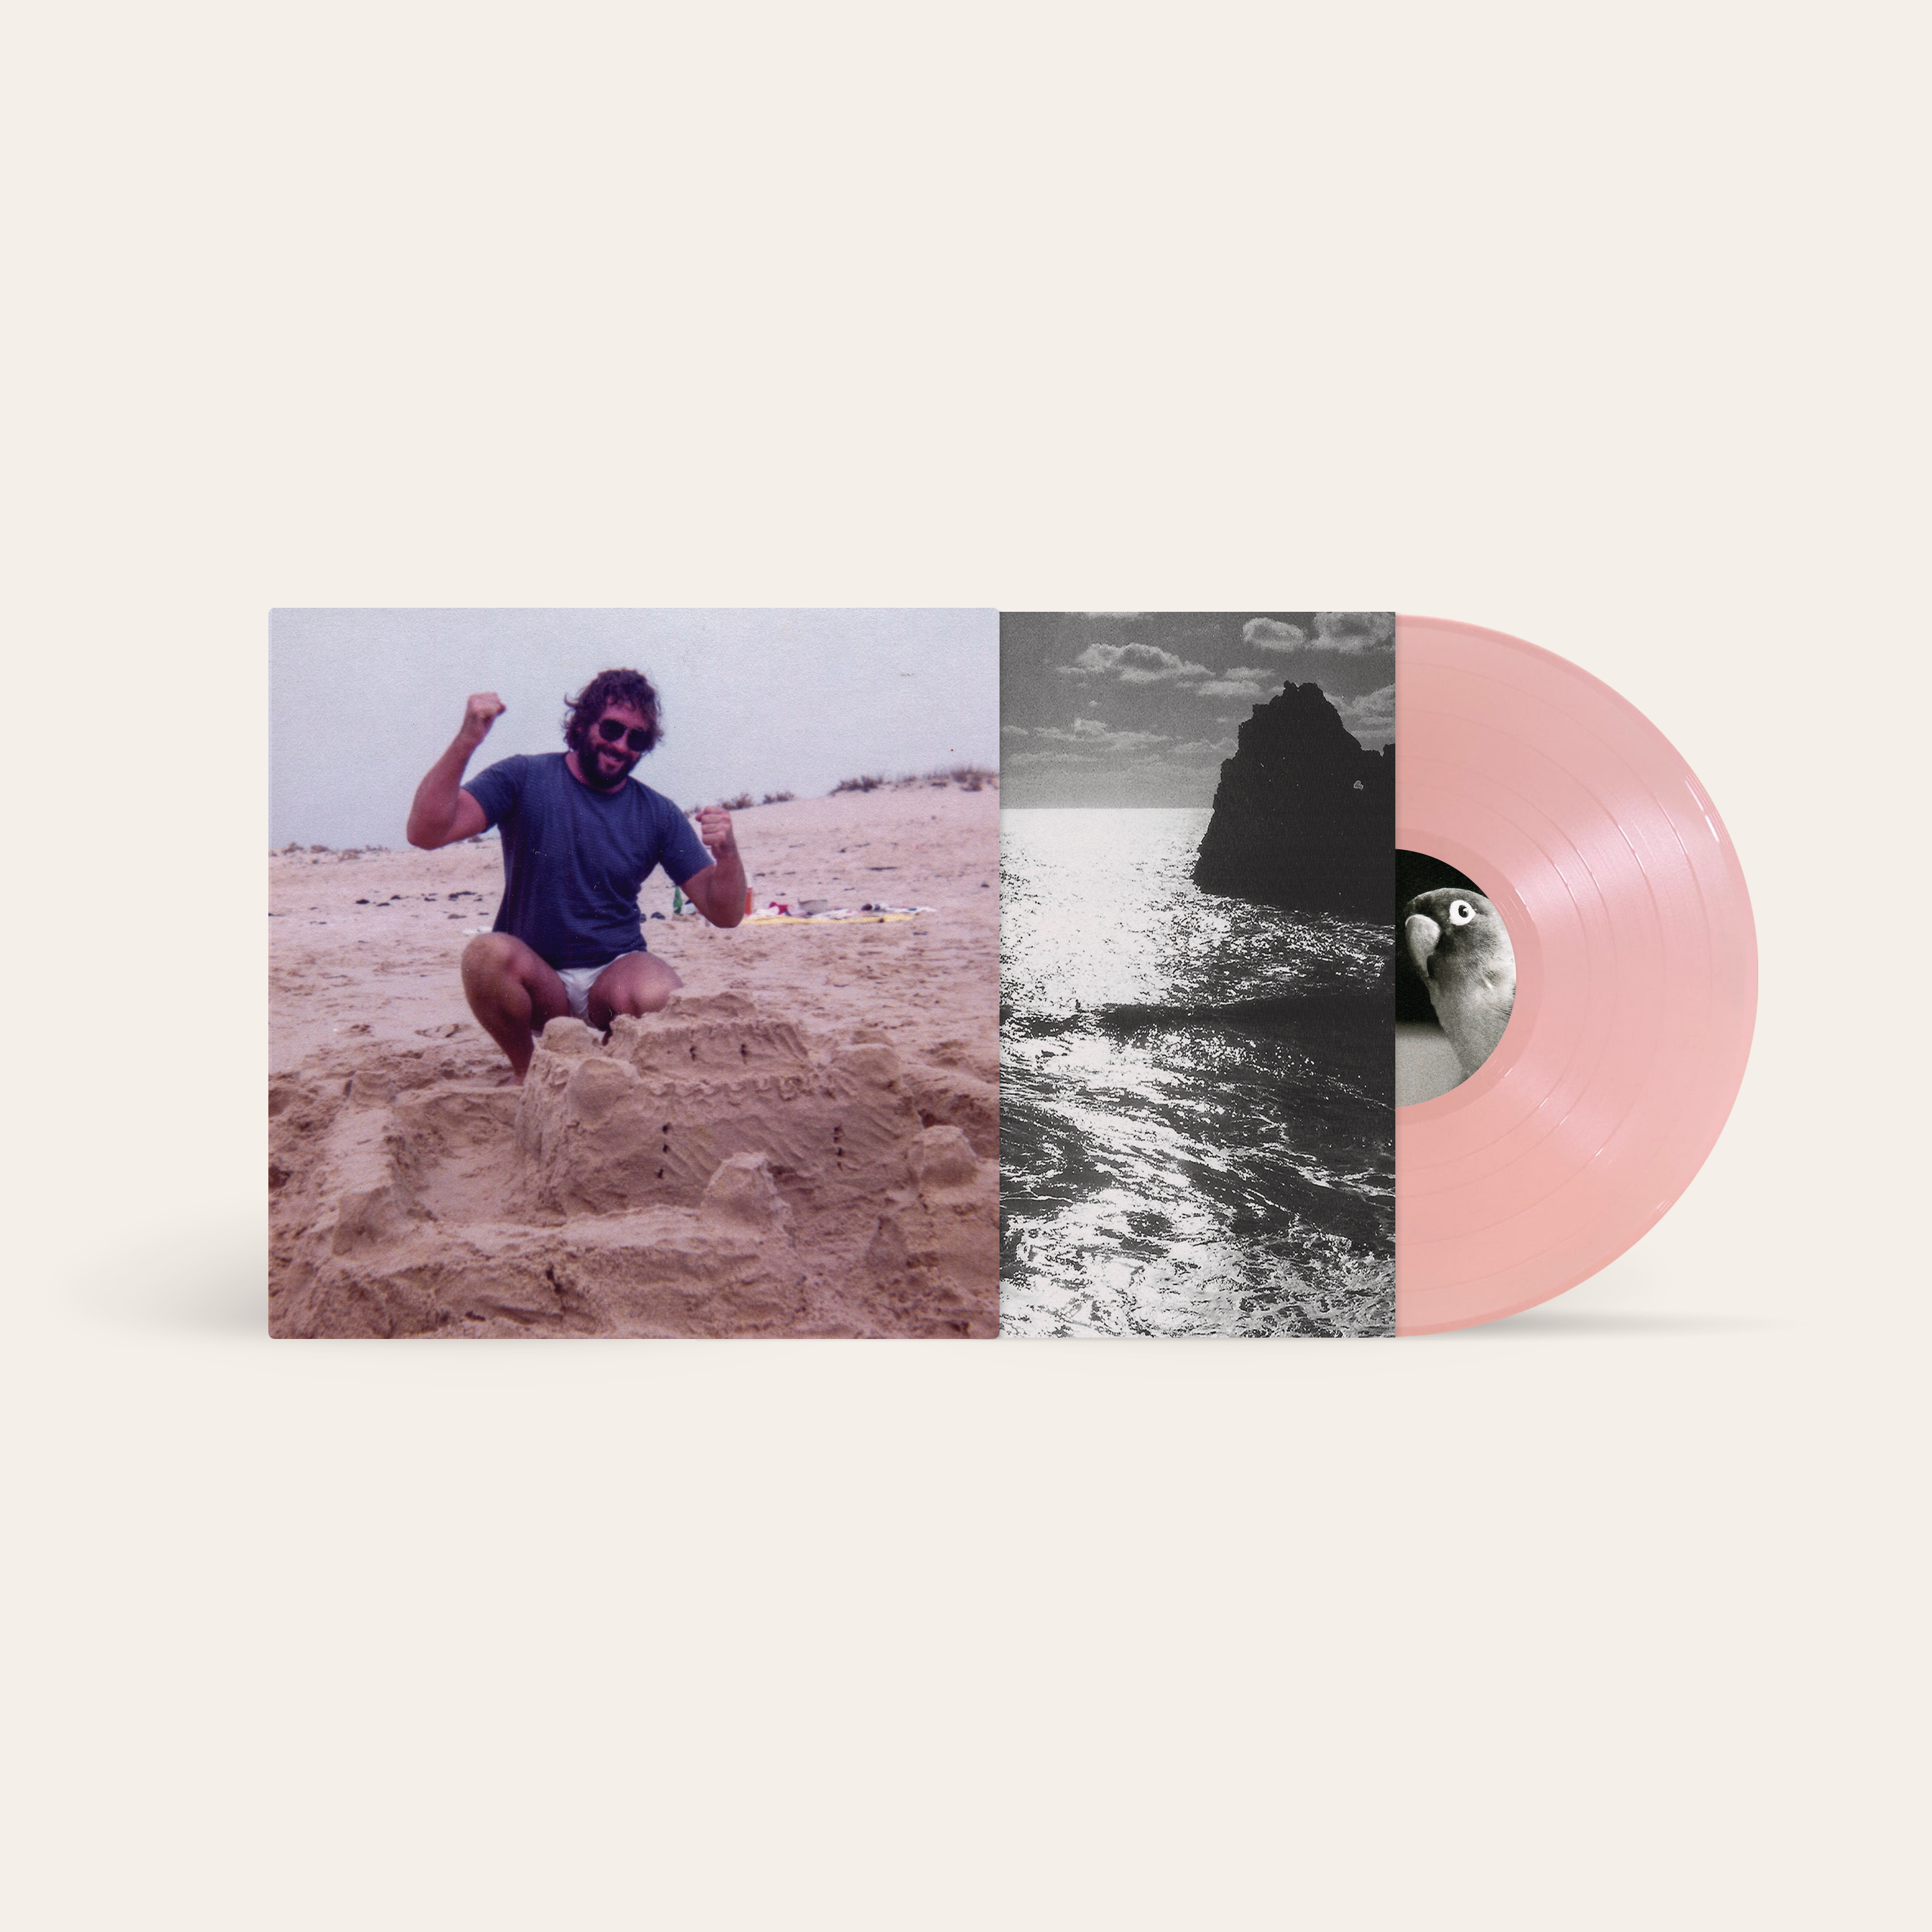 Until The Tide Creeps In: Limited Edition Double Pink Vinyl LP